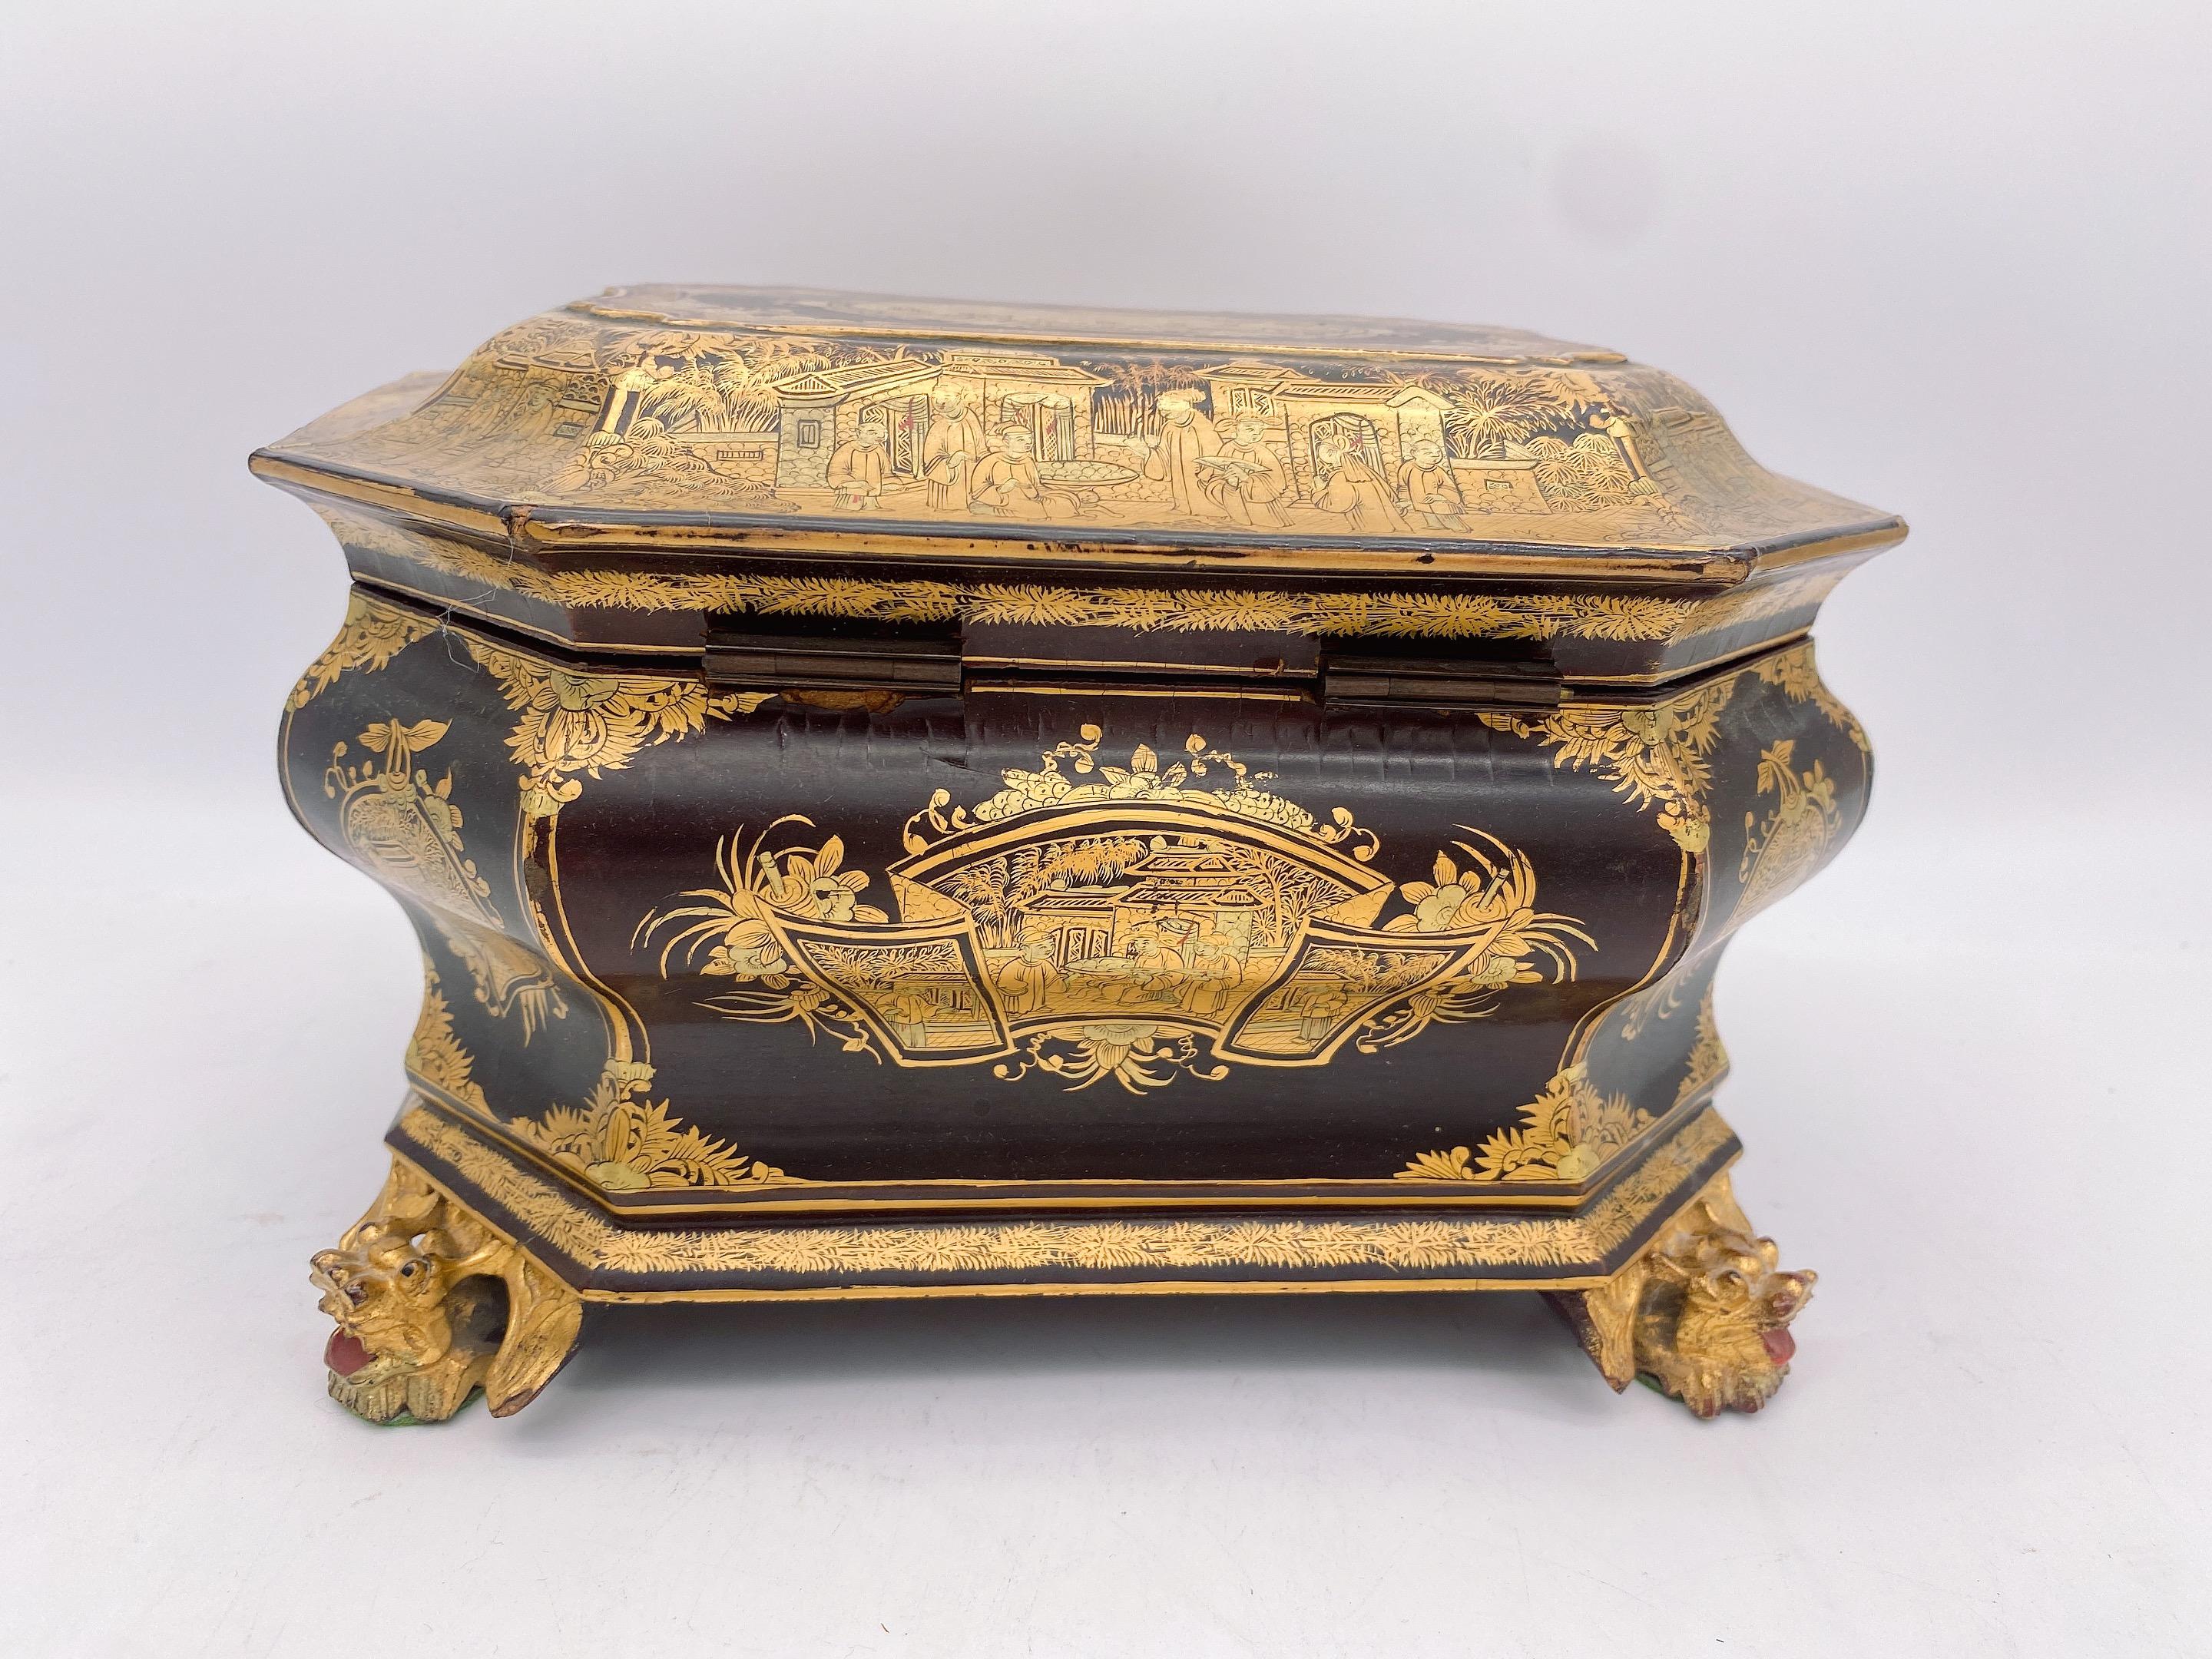 19th Century Antique Gilt Lacquer Chinese Tea Caddy 2